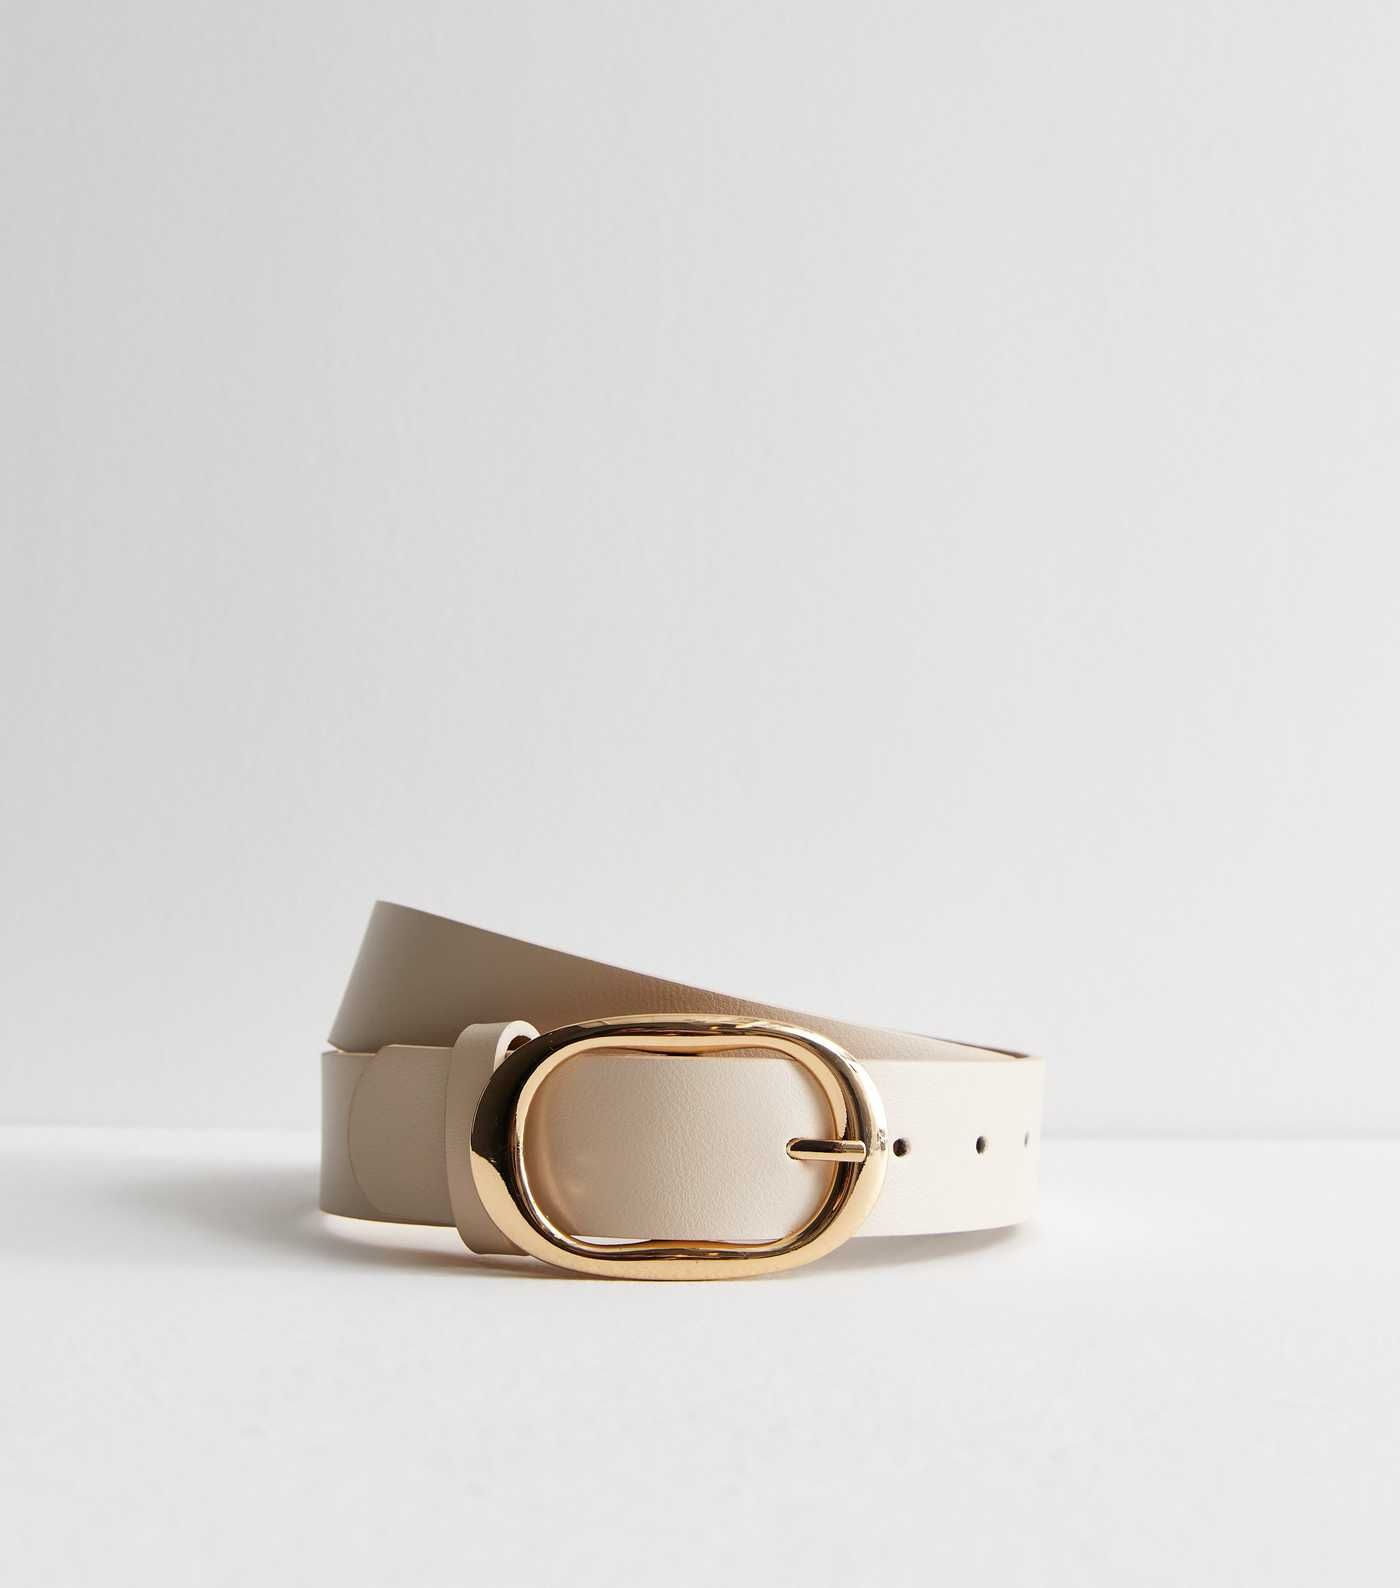 Off White Oval Buckle Belt
						
						Add to Saved Items
						Remove from Saved Items | New Look (UK)